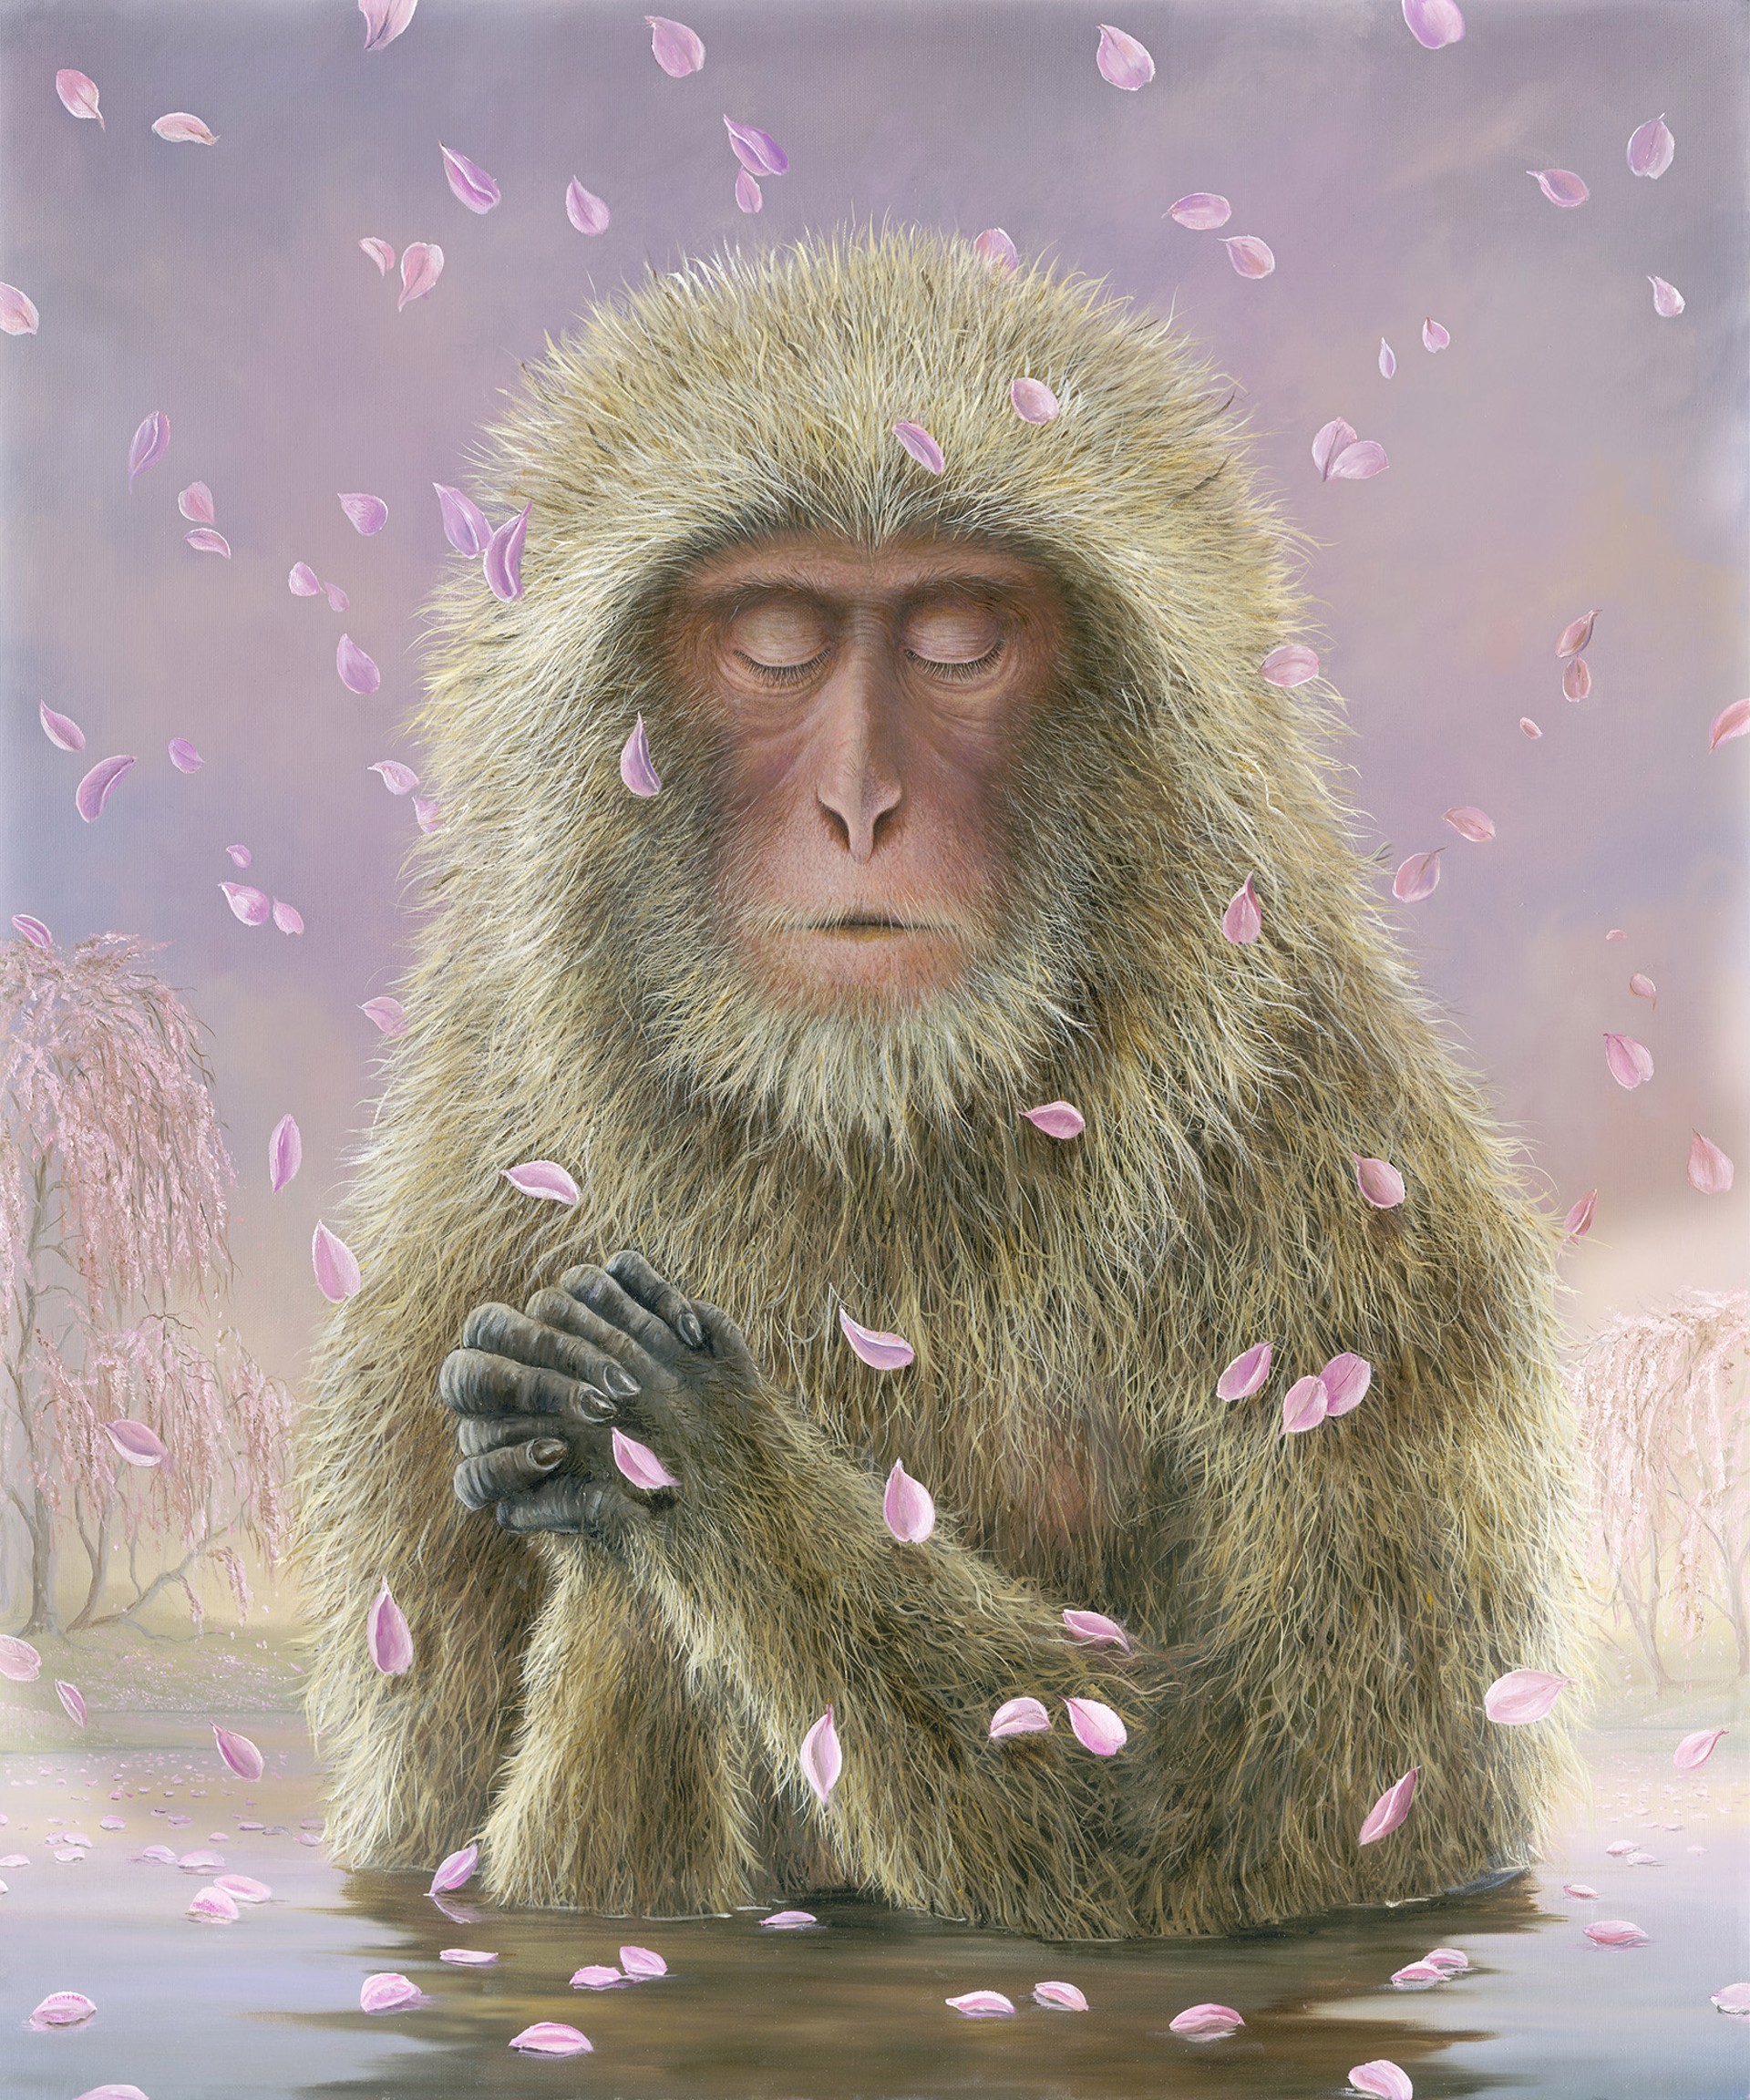 The Prayer by Robert Bissell